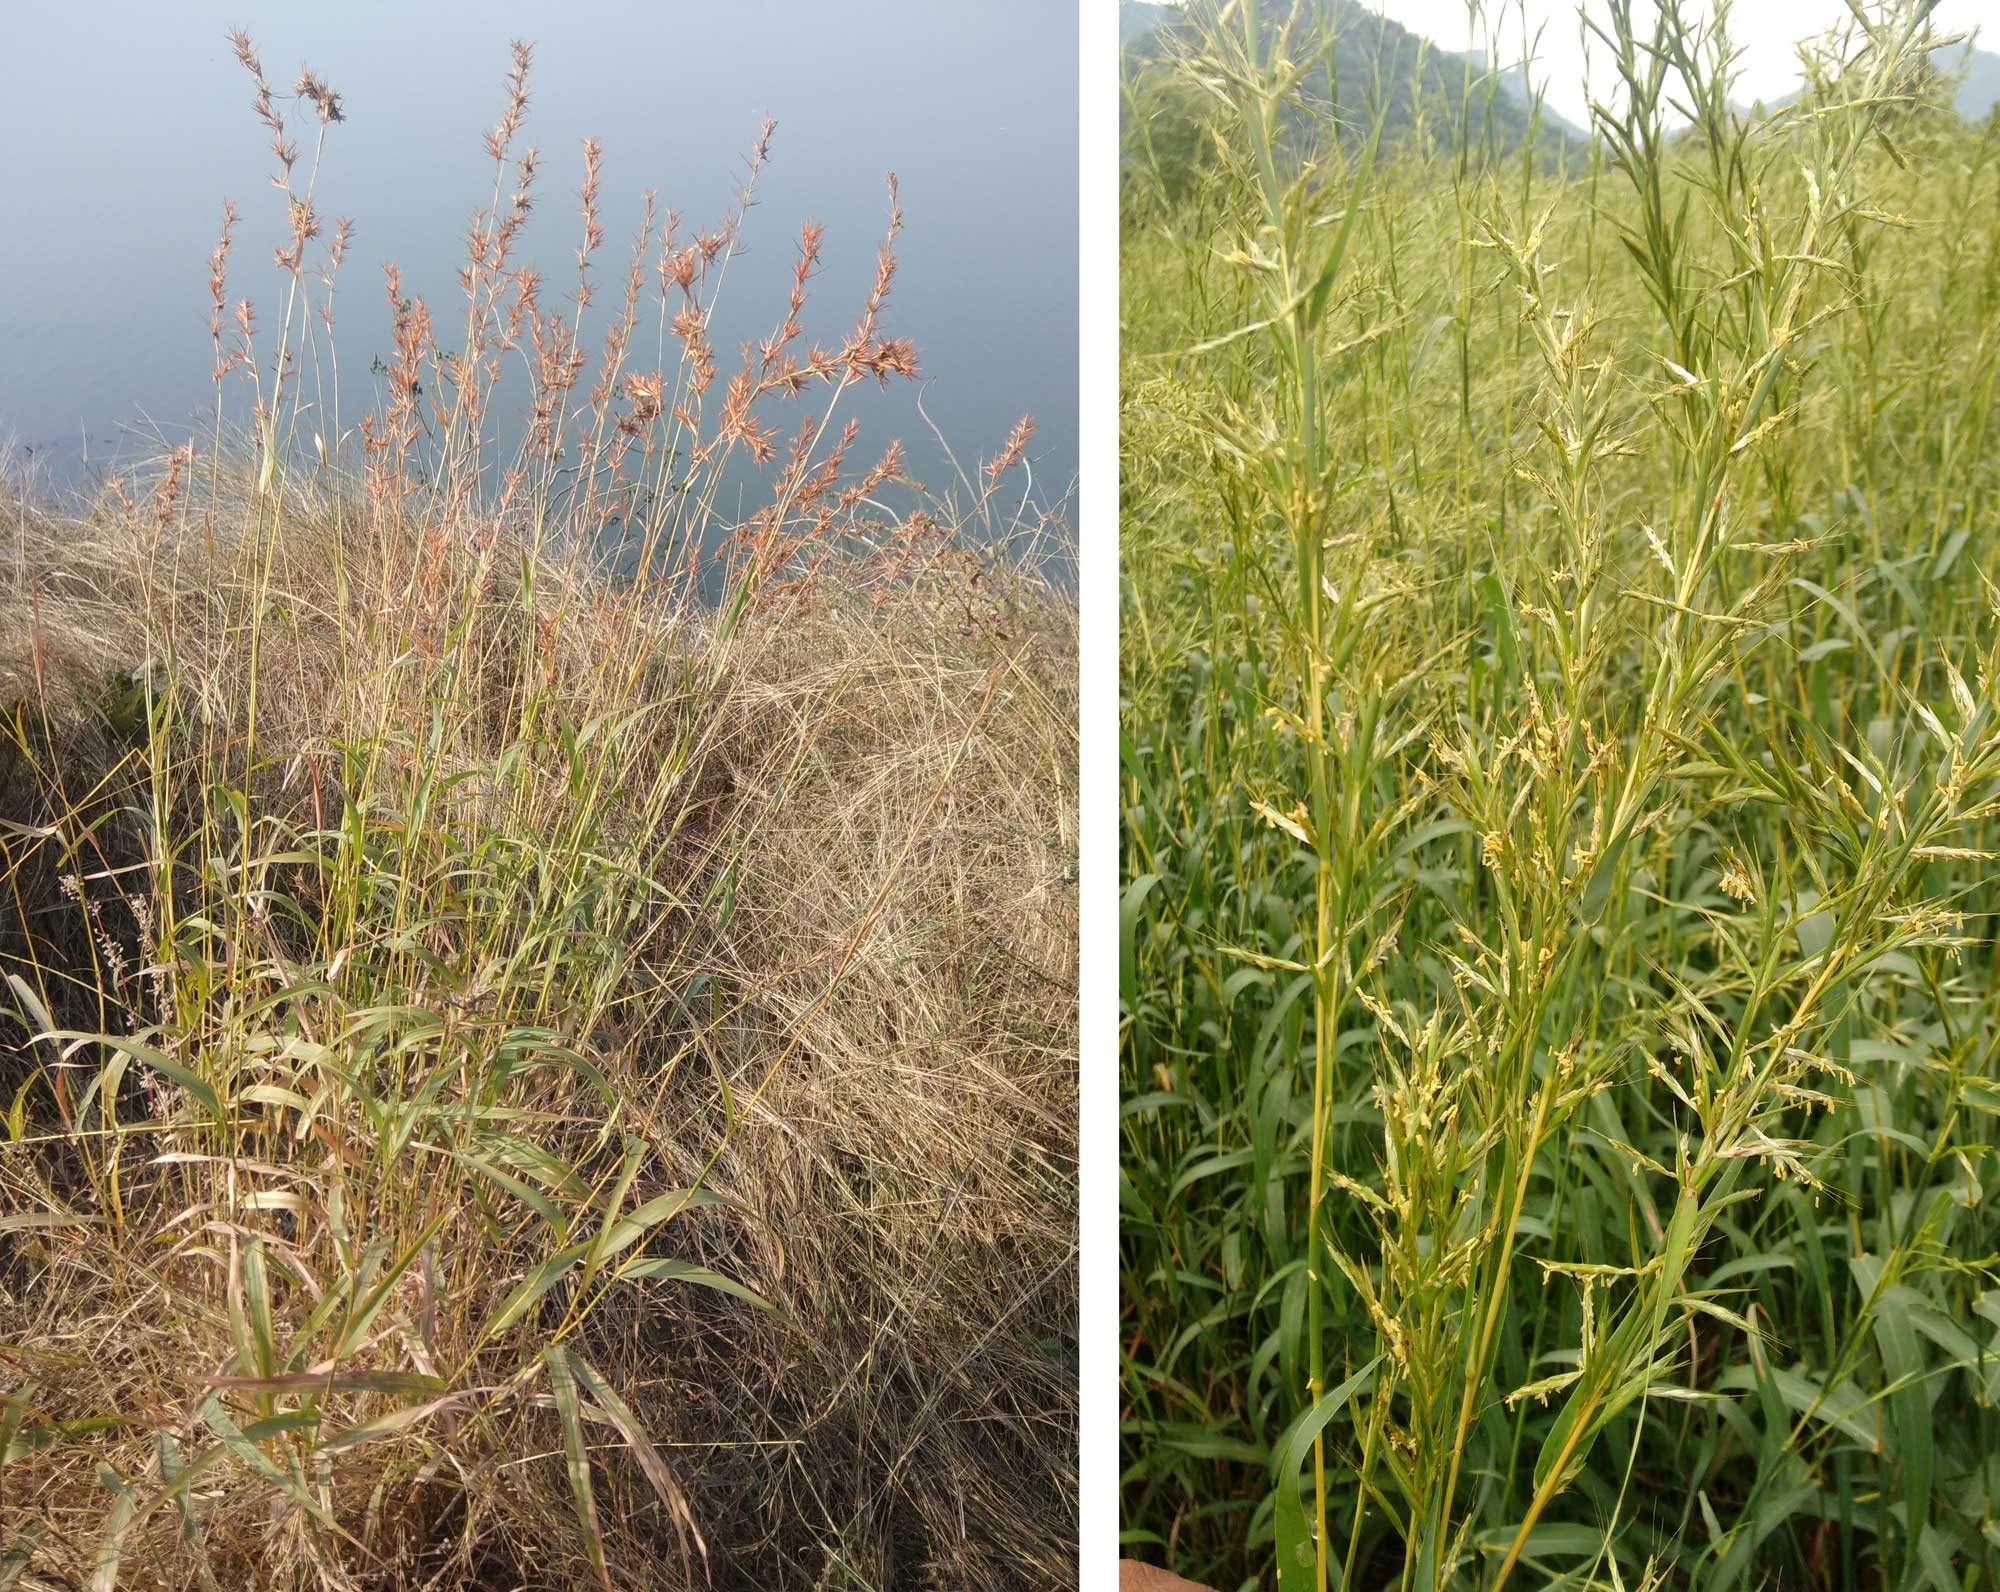 2-panel image showing pictures of palmarosa plants. Panel 1: Palmarosa in flower next to a body of water. Panel 2: Closer of flowering shoots of a different palmarosa plant.